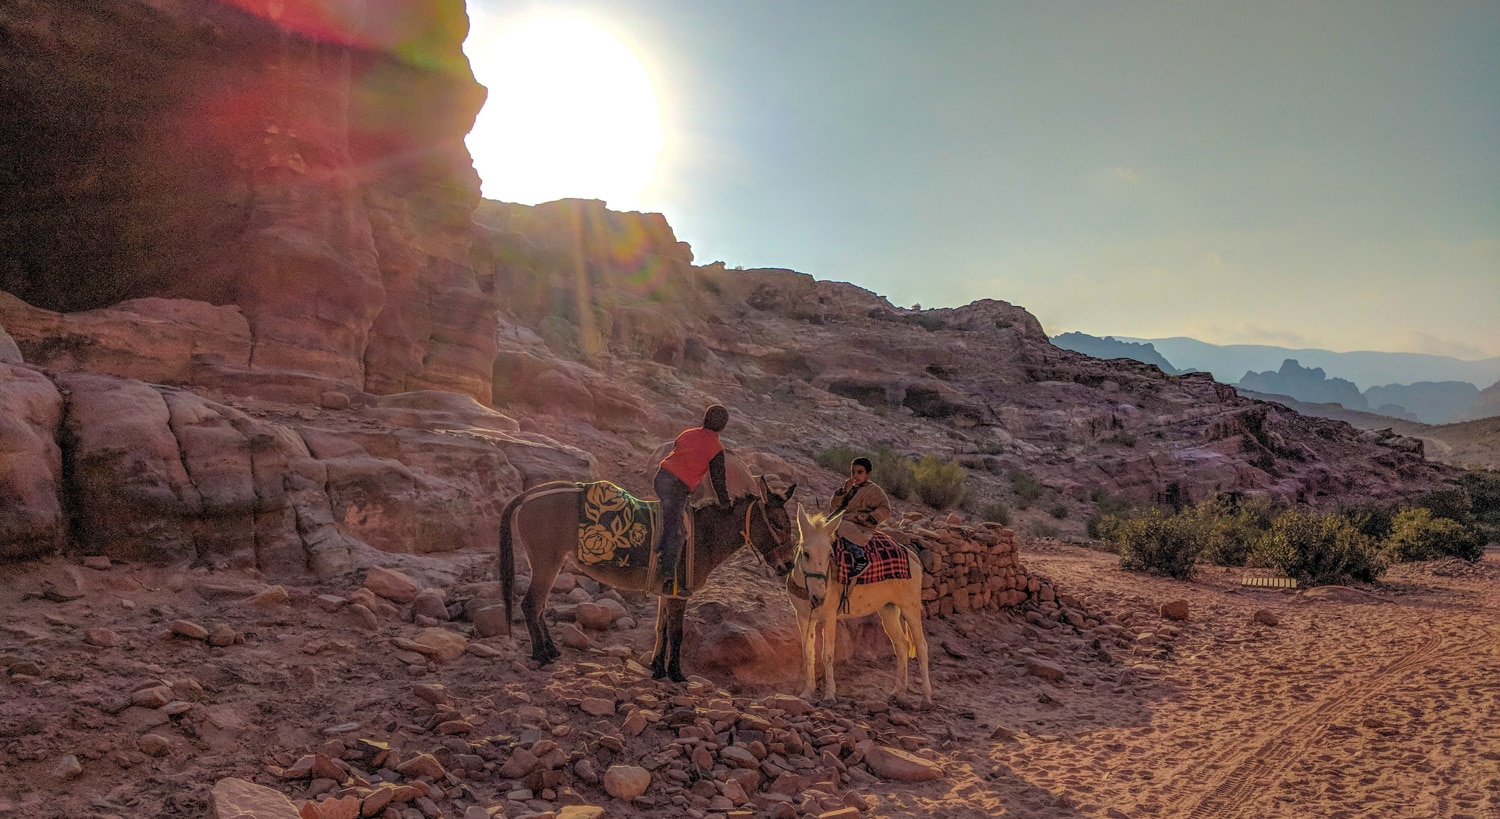 Local kids on horseback near the climb to the cathedral of petra